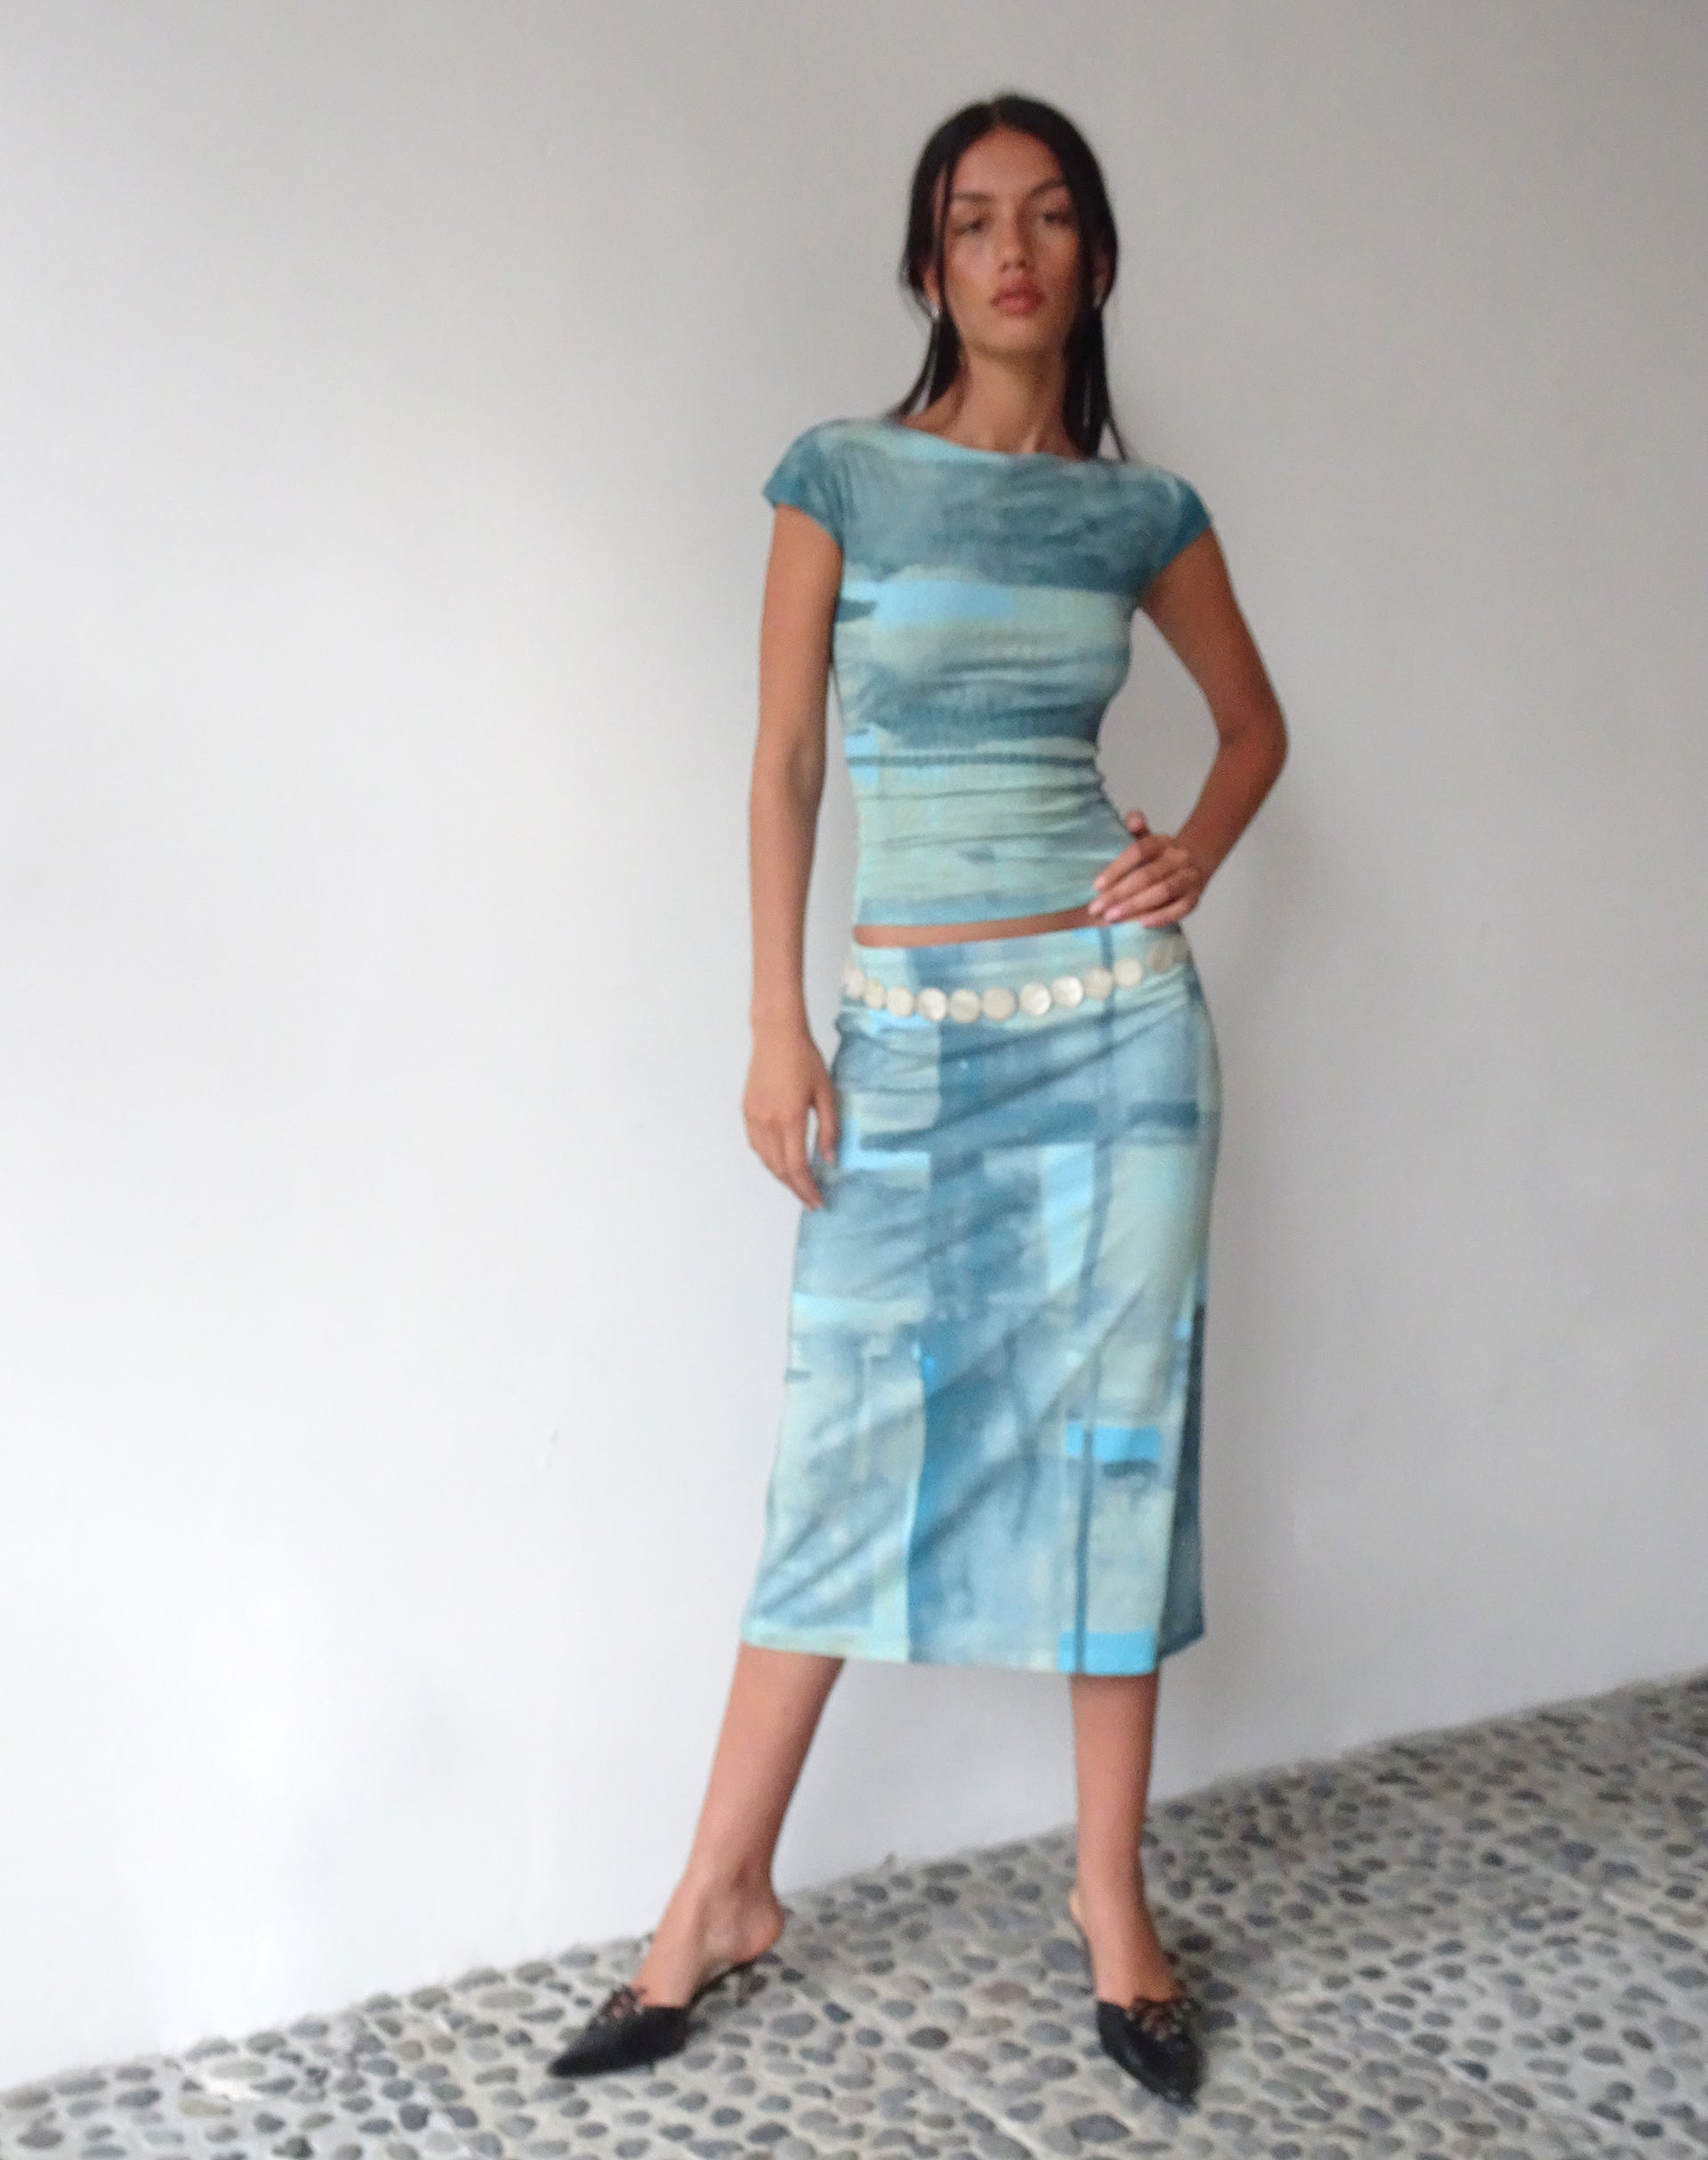 Image of MOTEL X JACQUIE Gia Midi Skirt in Mesh Abstract Paint Brush Green